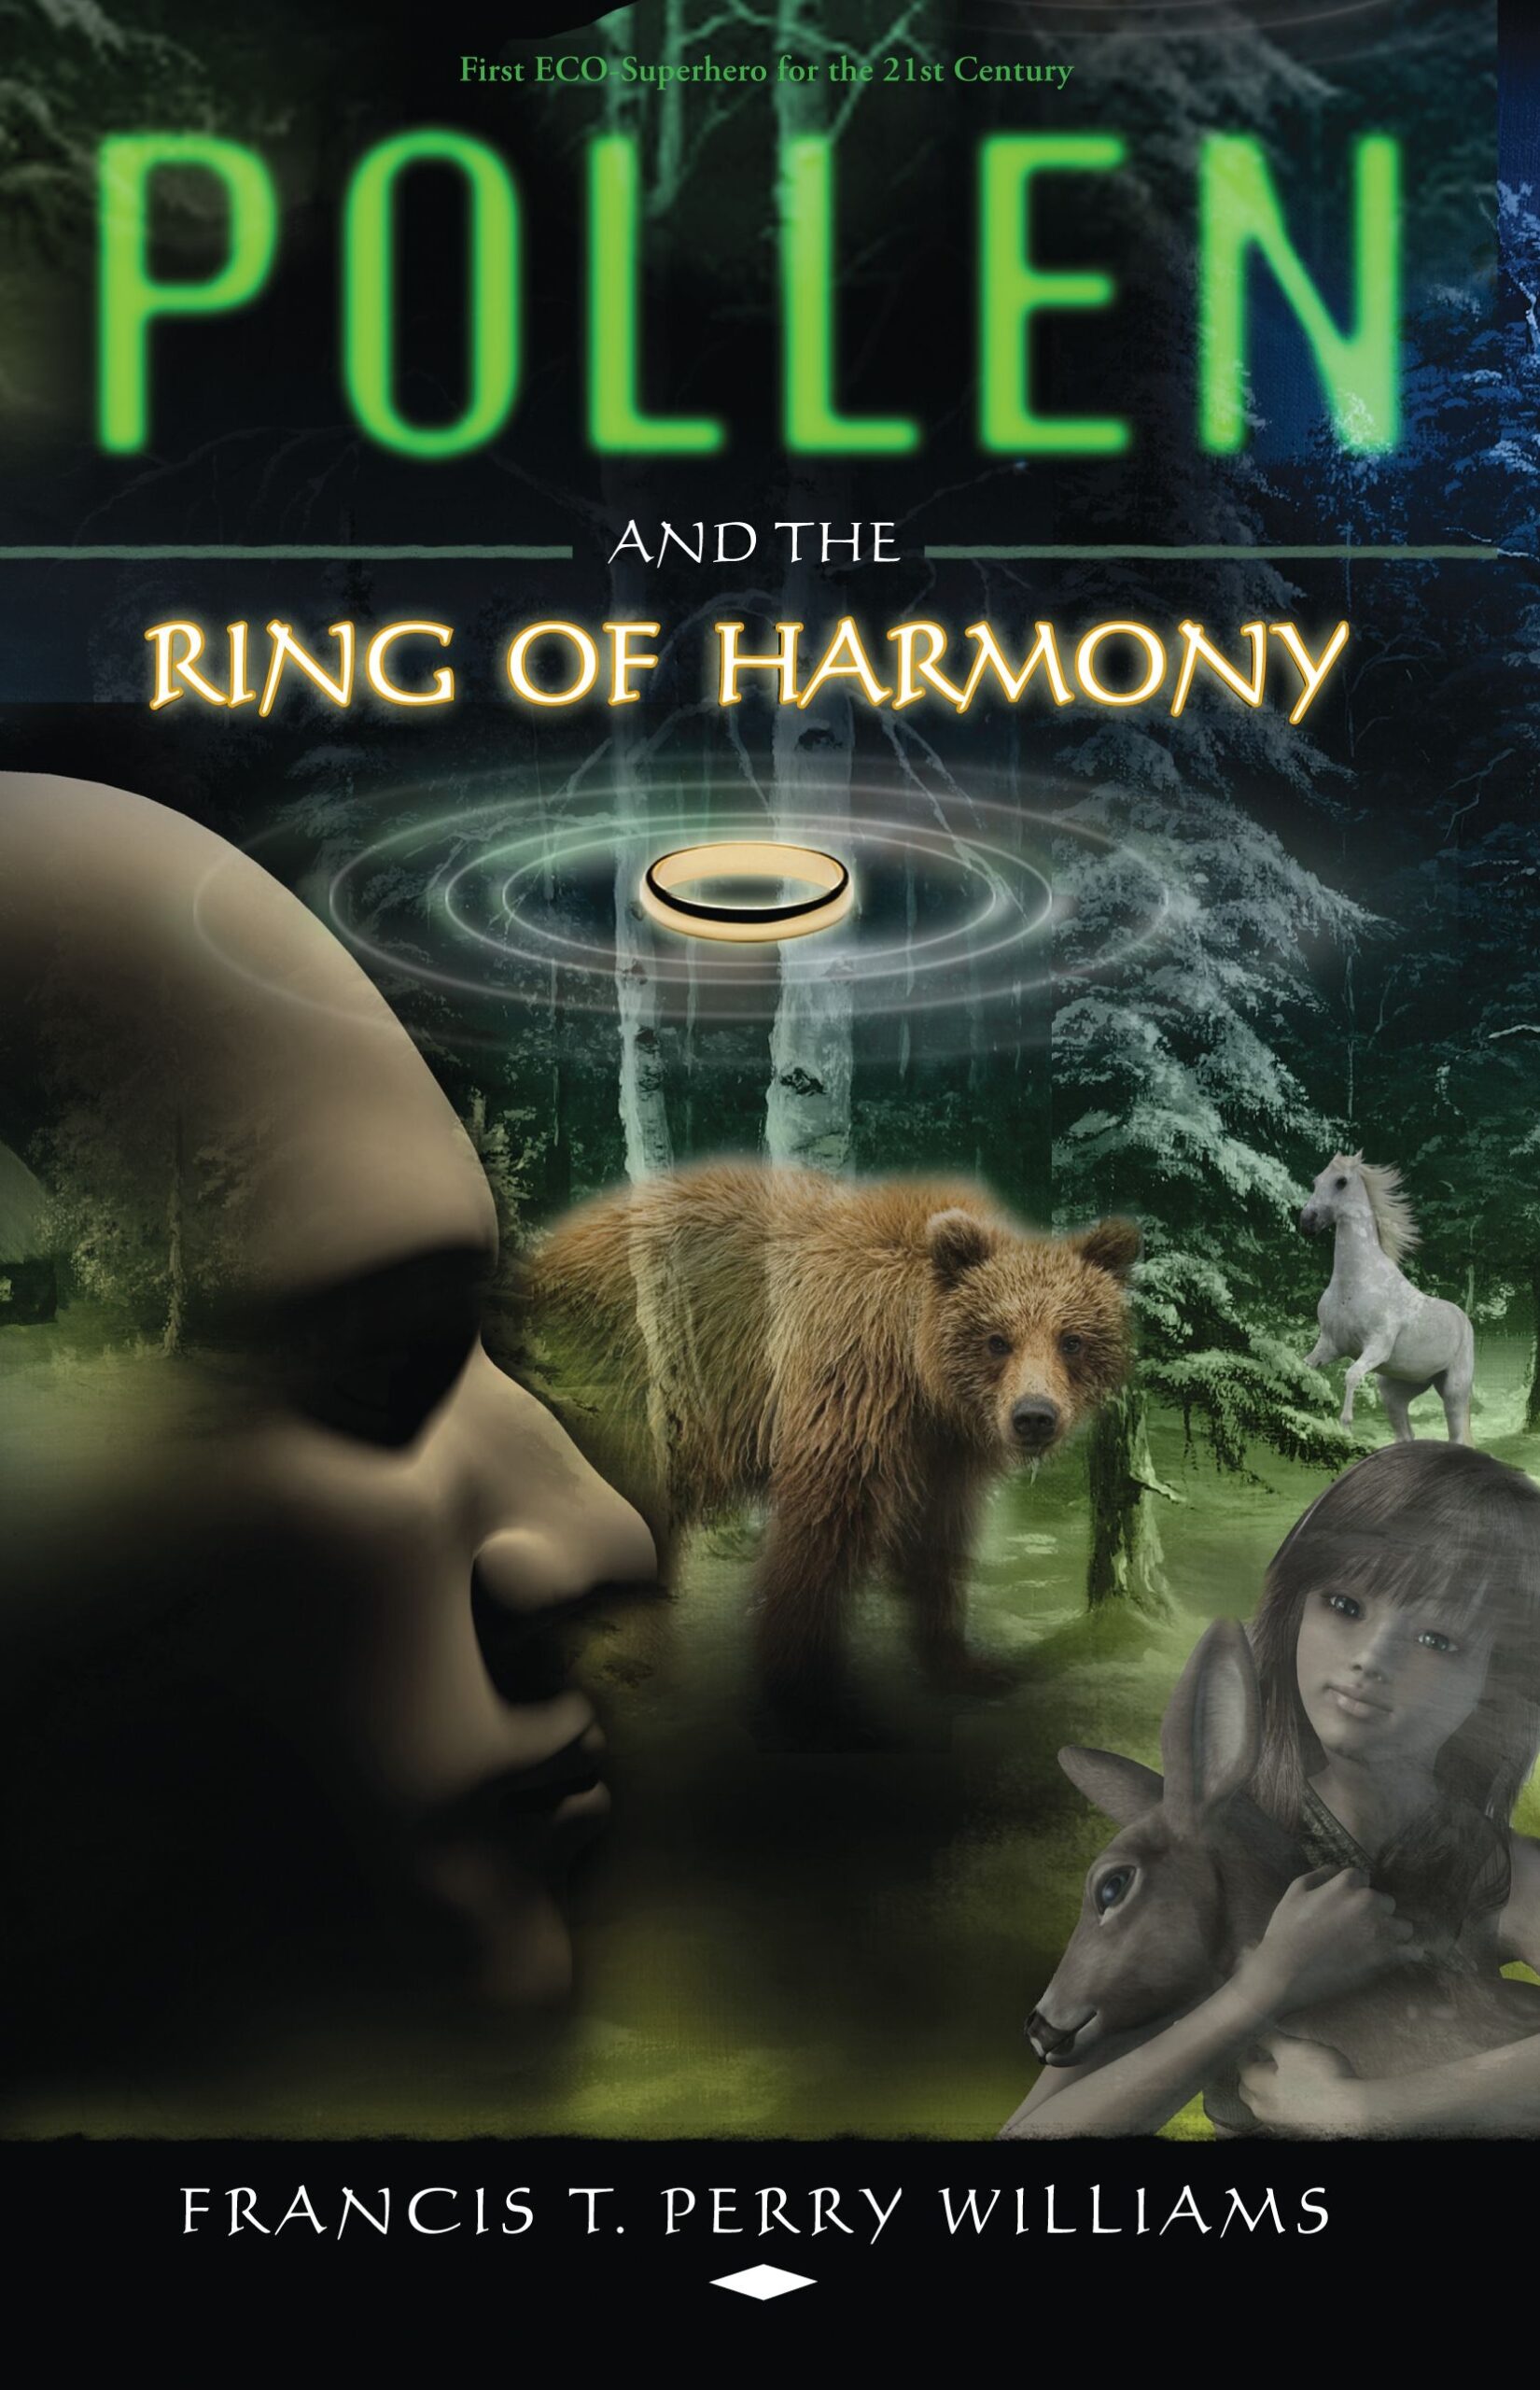 The front cover of Pollen and the Ring of Harmony by Francis T. Perry Williams